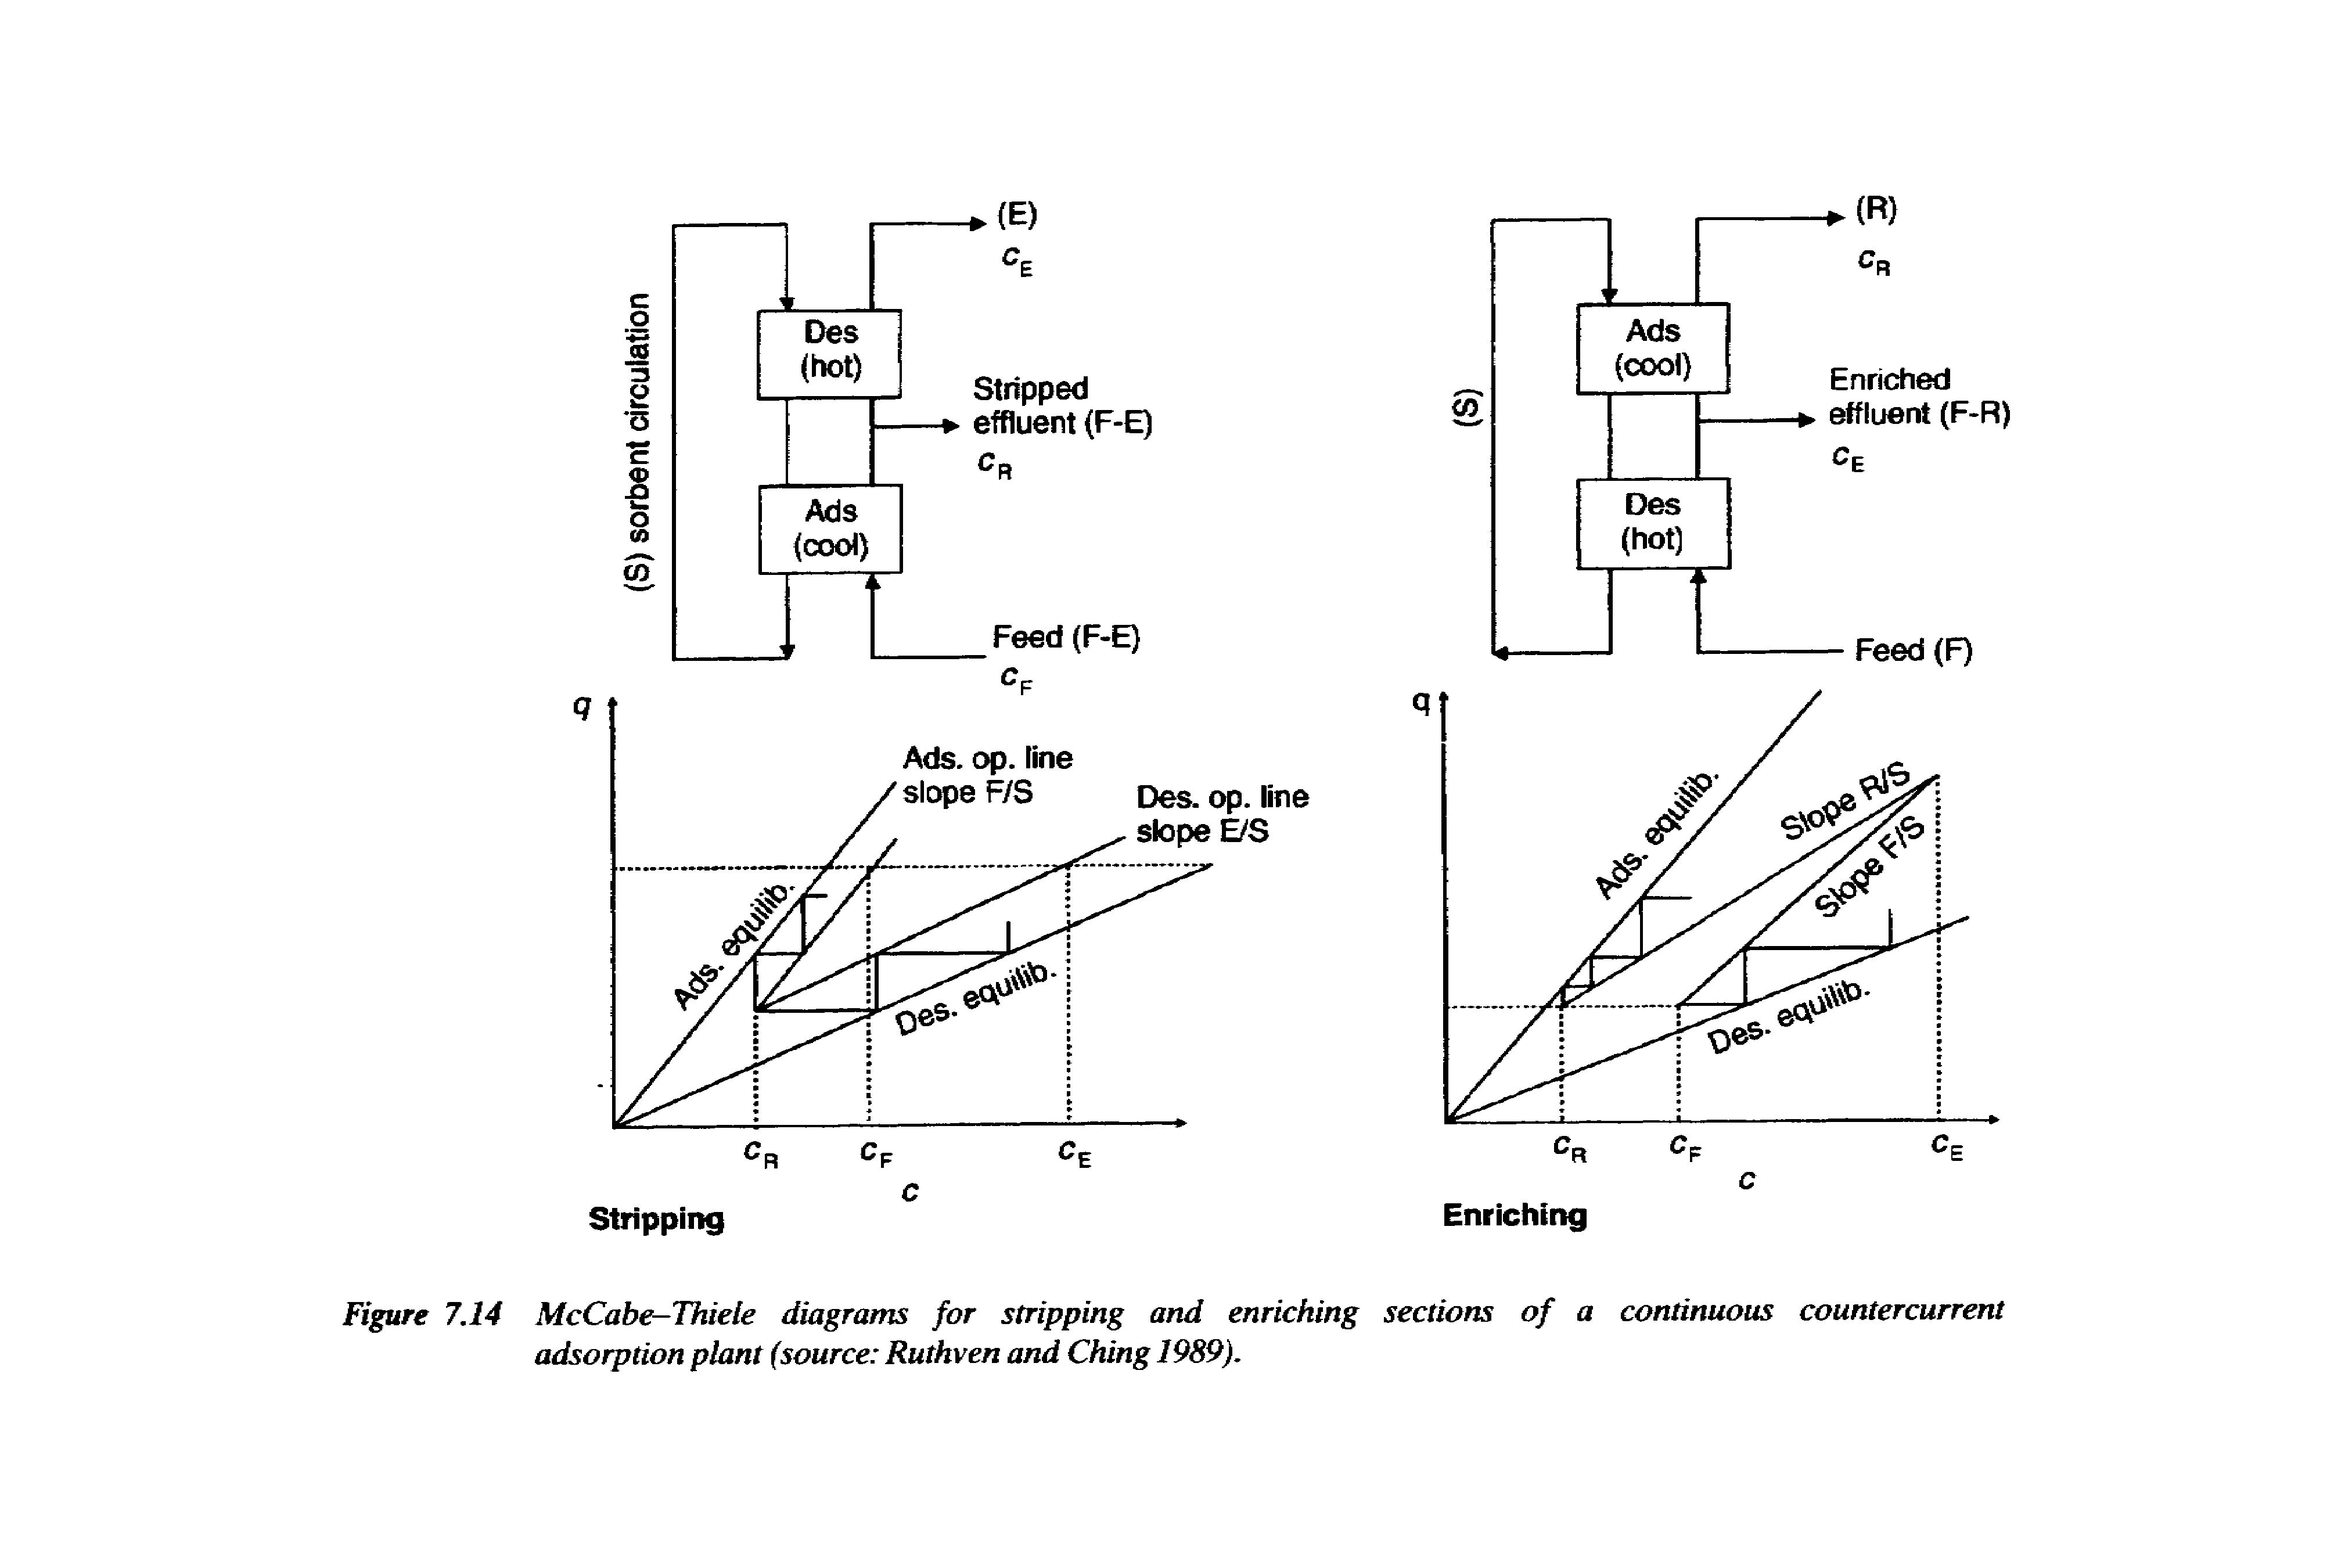 Figure 7.14 McCabe-Thiele diagrams for stripping and enriching sections of a continuous countercurrent adsorption plant (source Ruthven and Ching 1989).